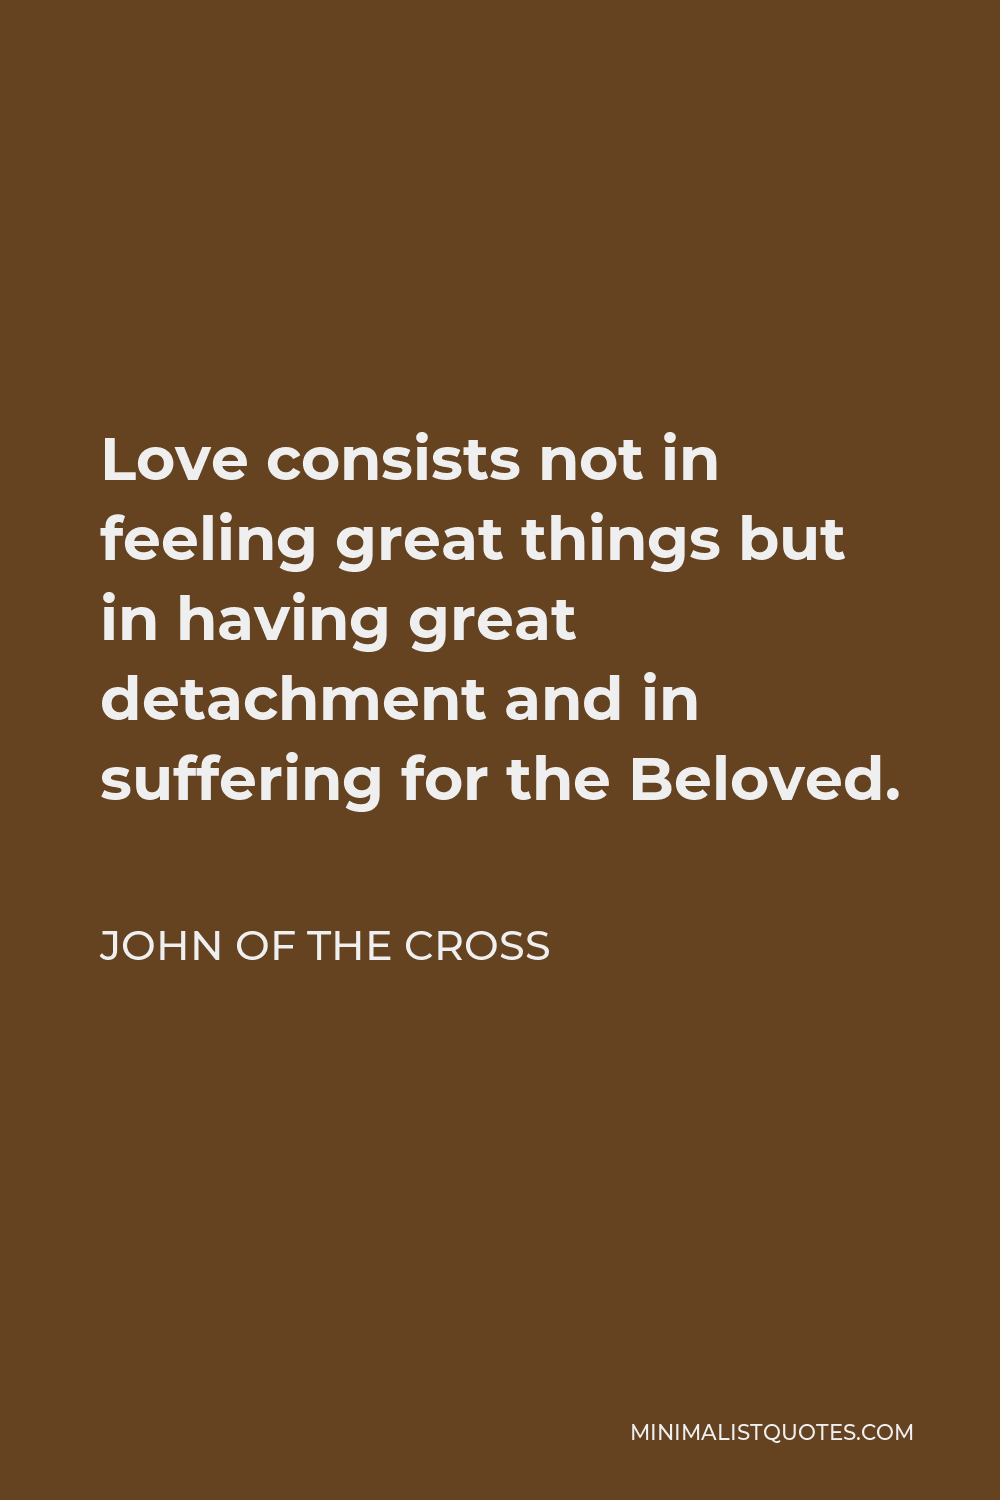 John of the Cross Quote - Love consists not in feeling great things but in having great detachment and in suffering for the Beloved.